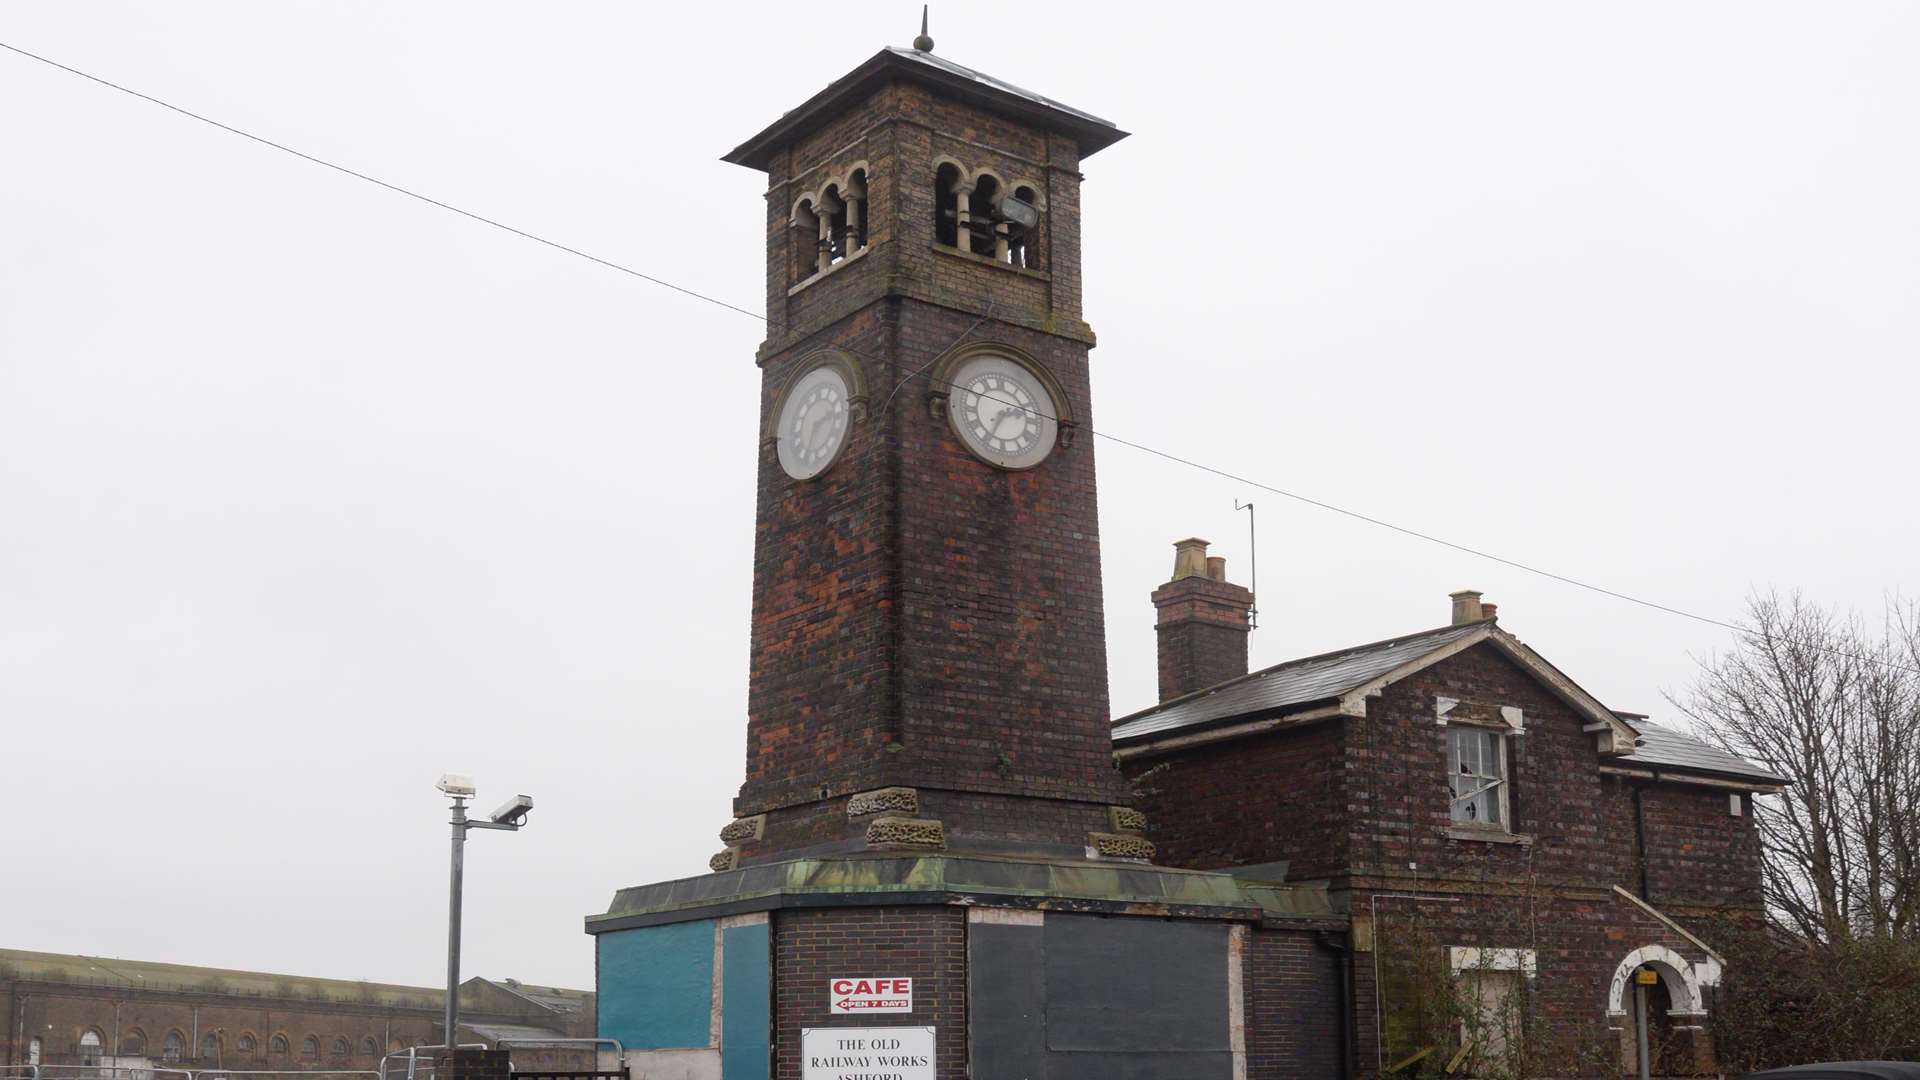 The historic railway works could still become home to AIMREC